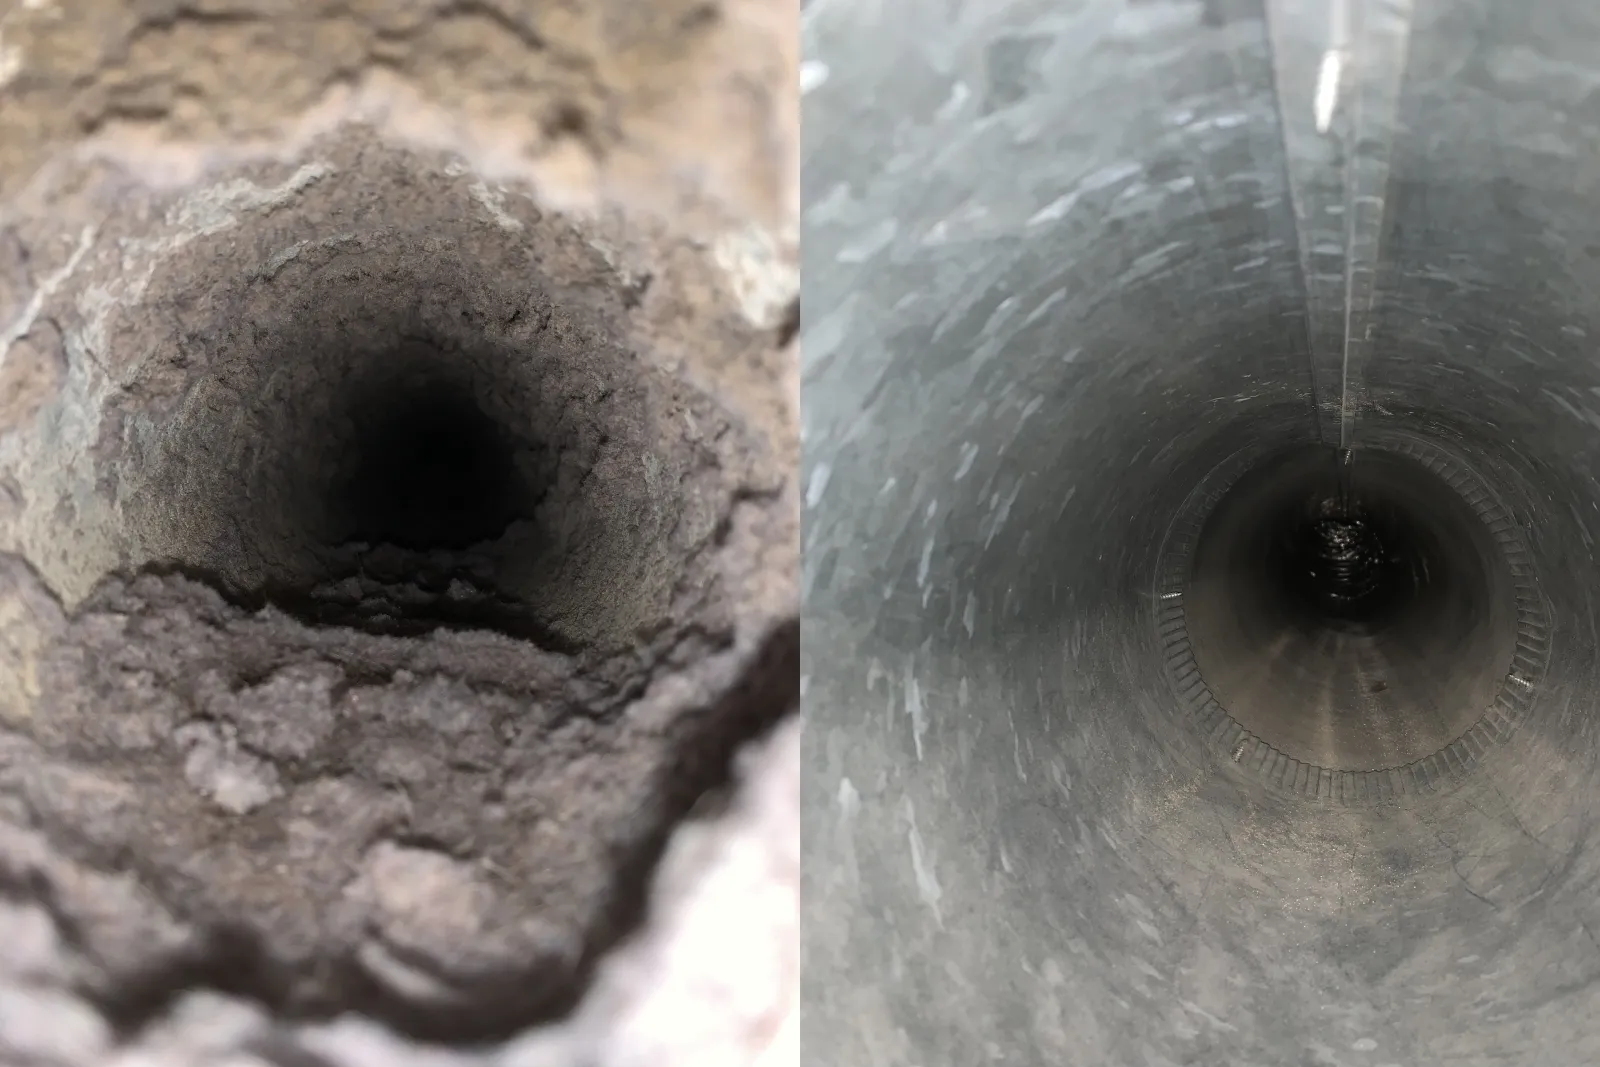 side by side images of air vents - left side is the before image with lots of dirt and crud coating the duct, right image the after Zerorez air duct cleaning professional service where you can't see any dirt